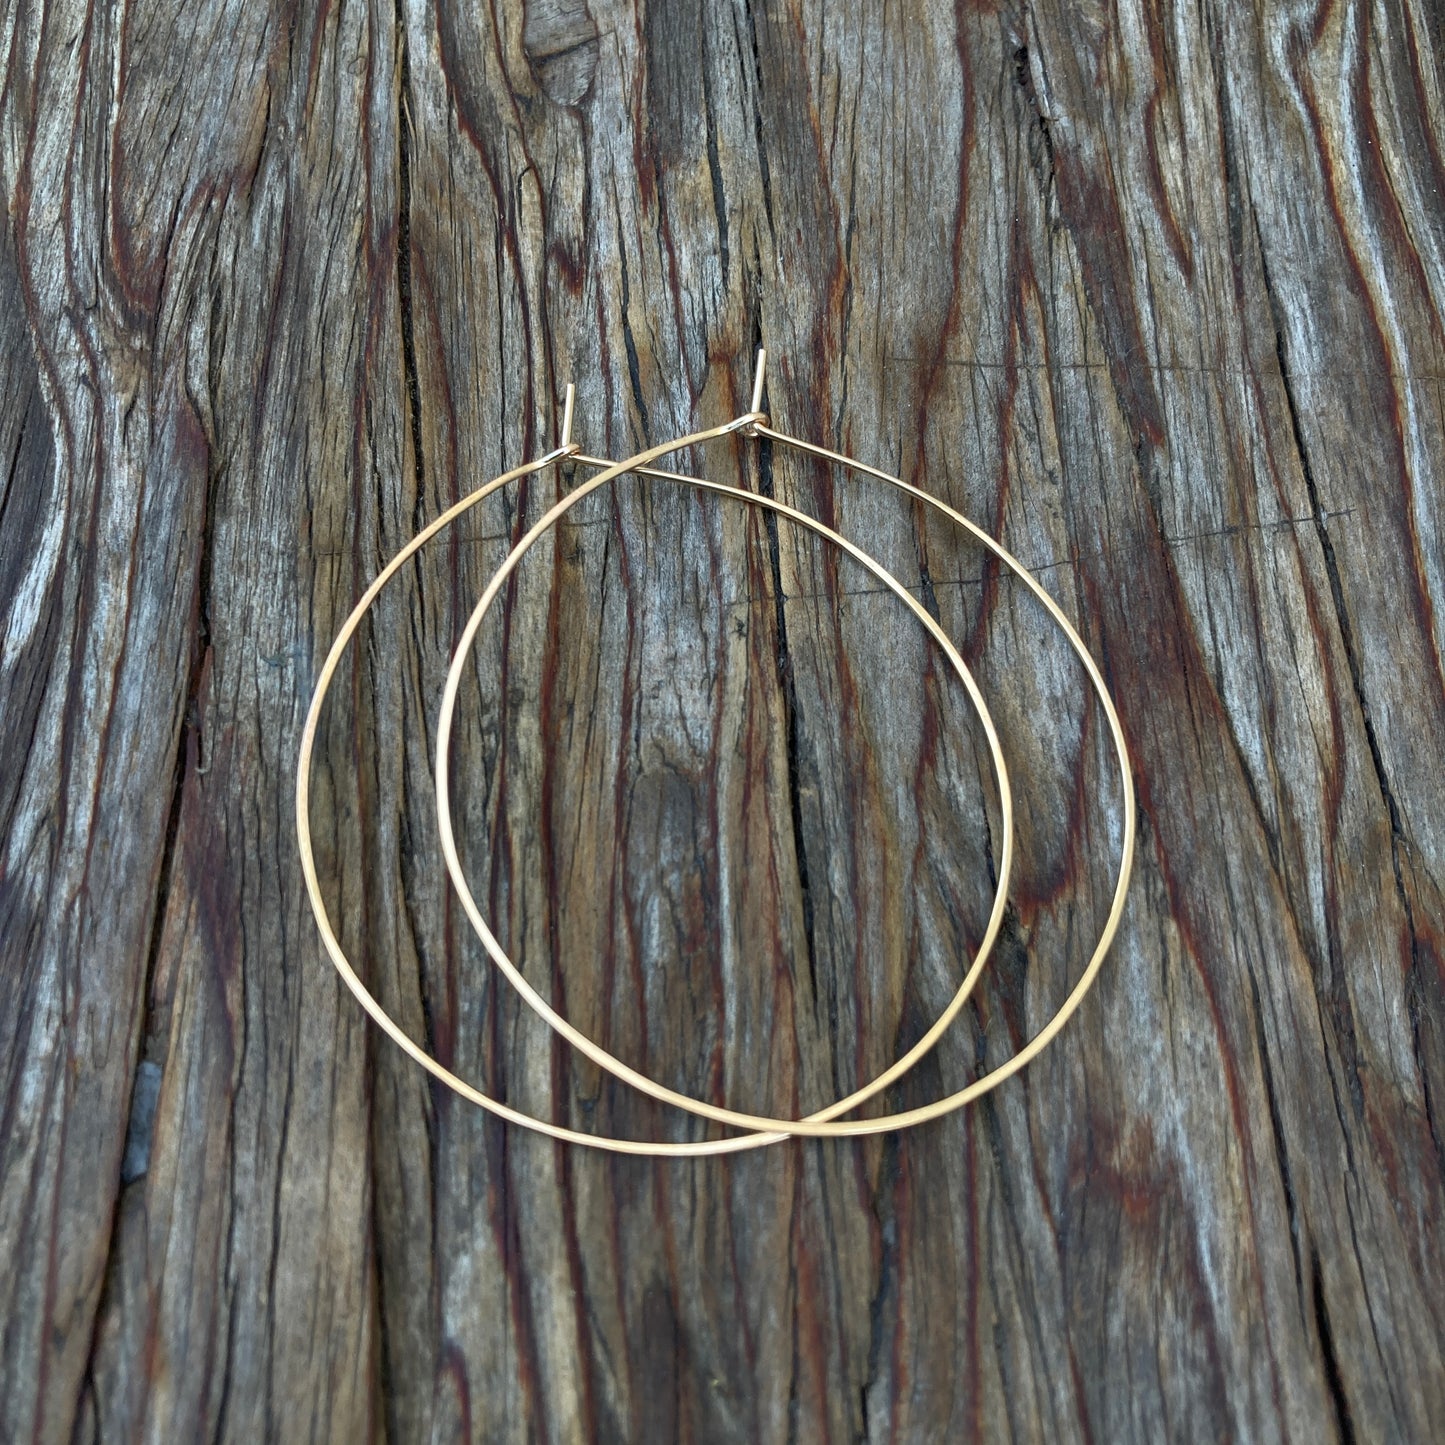 Simple 14K Gold Filled Hammered Hoops Skinny Wire Jewelry